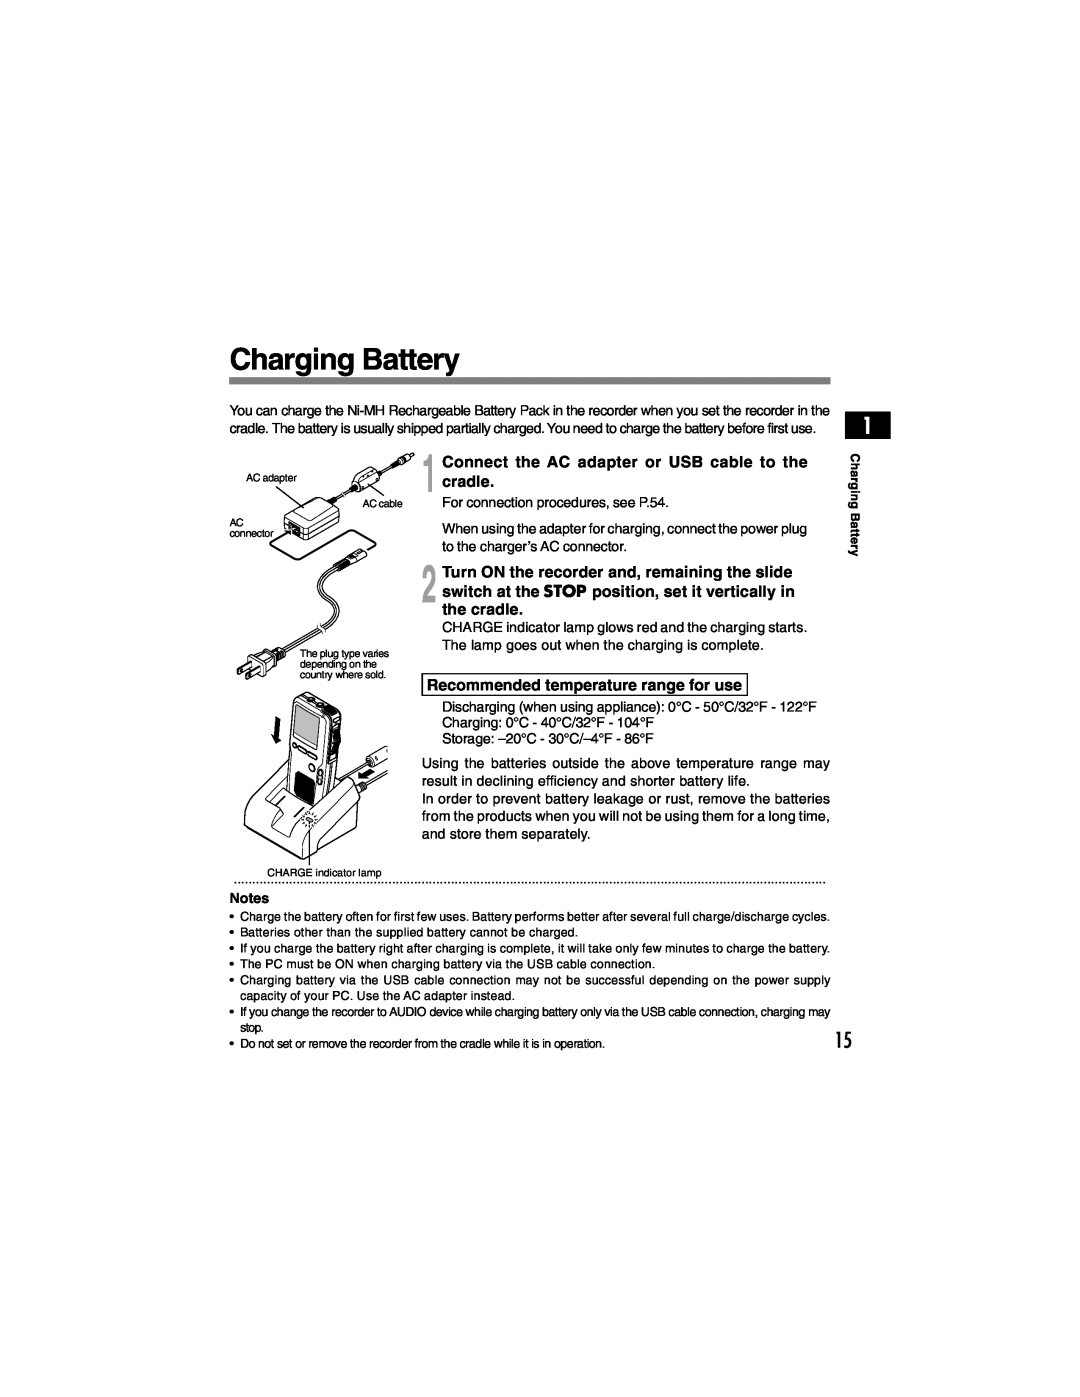 Olympus DS-4000 Charging Battery, Connect the AC adapter or USB cable to the cradle, Recommended temperature range for use 